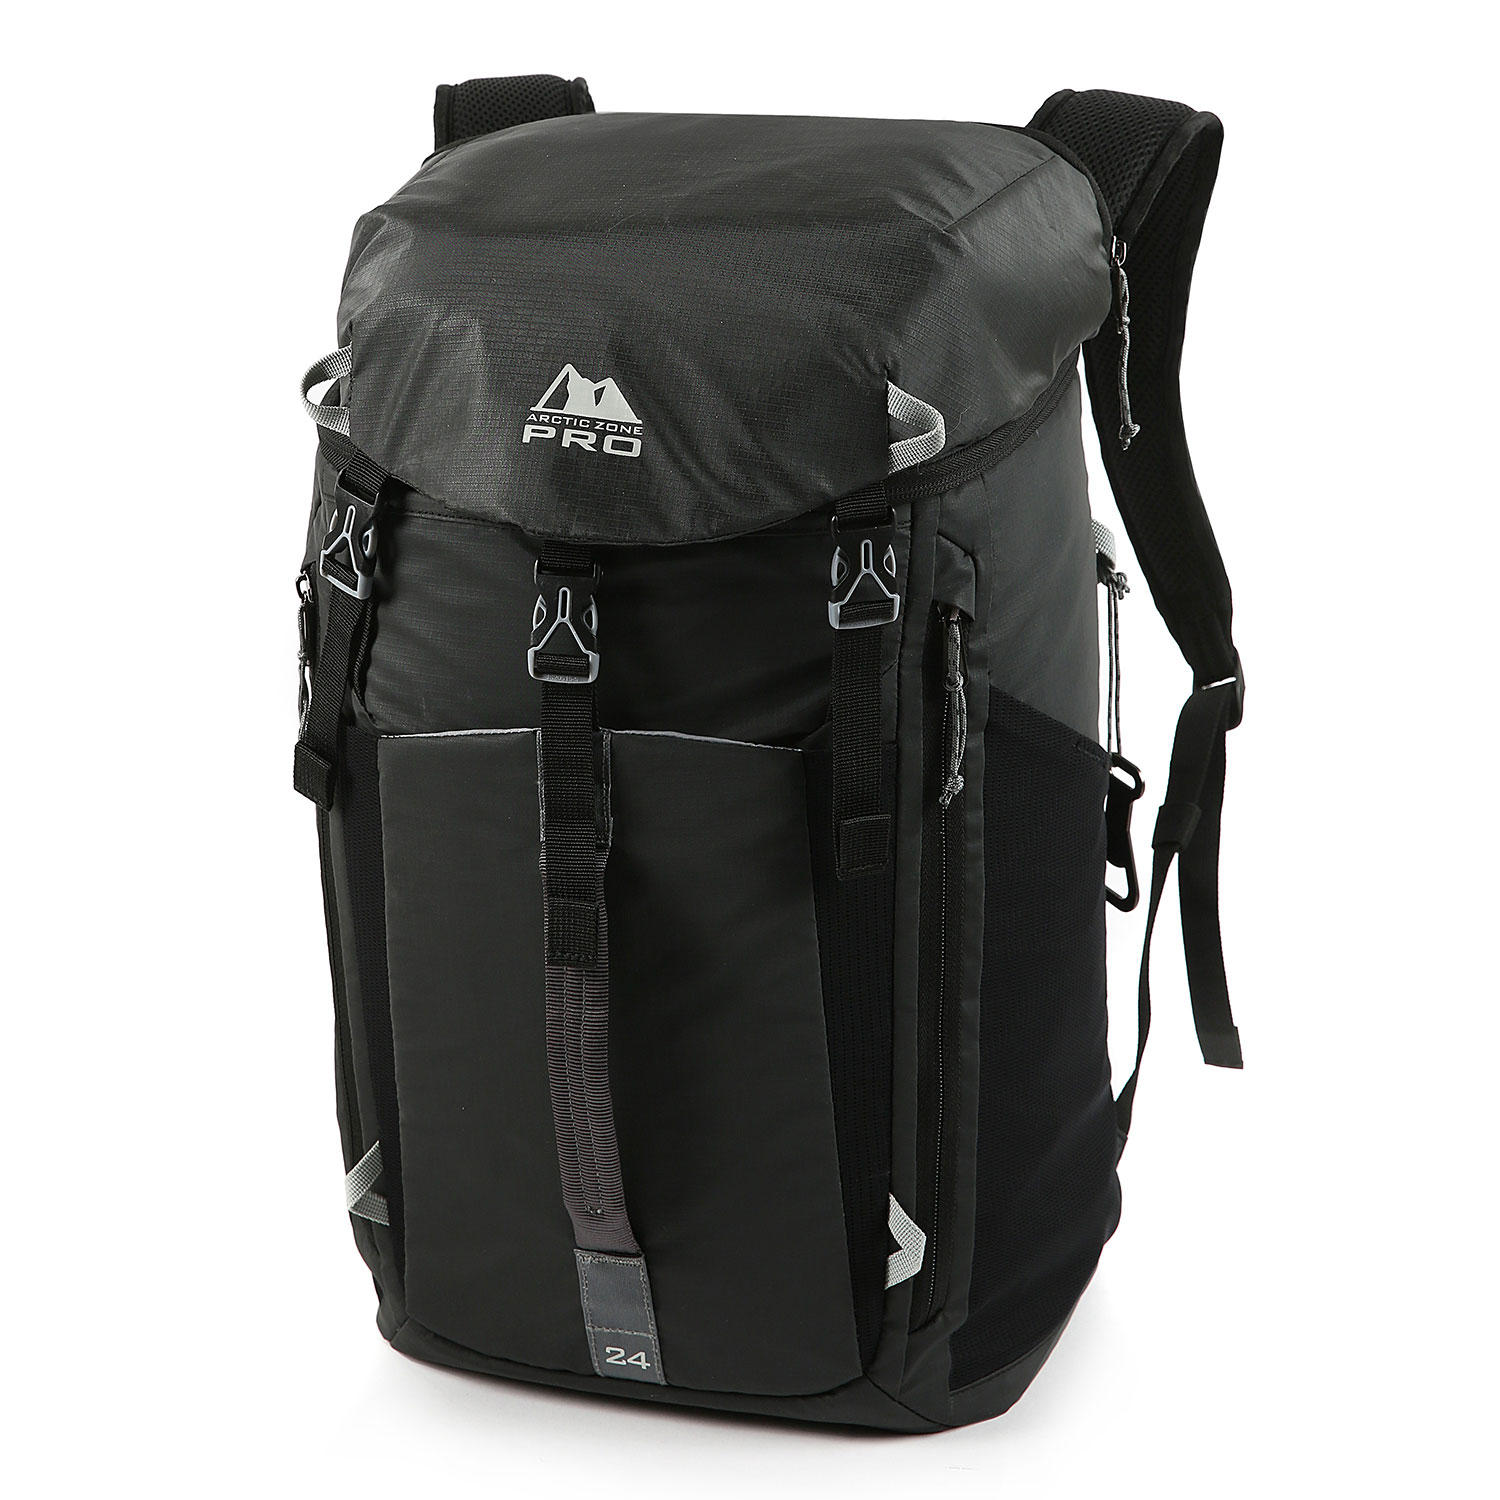 Arctic Zone Pro 24 Can Backpack Cooler - Black